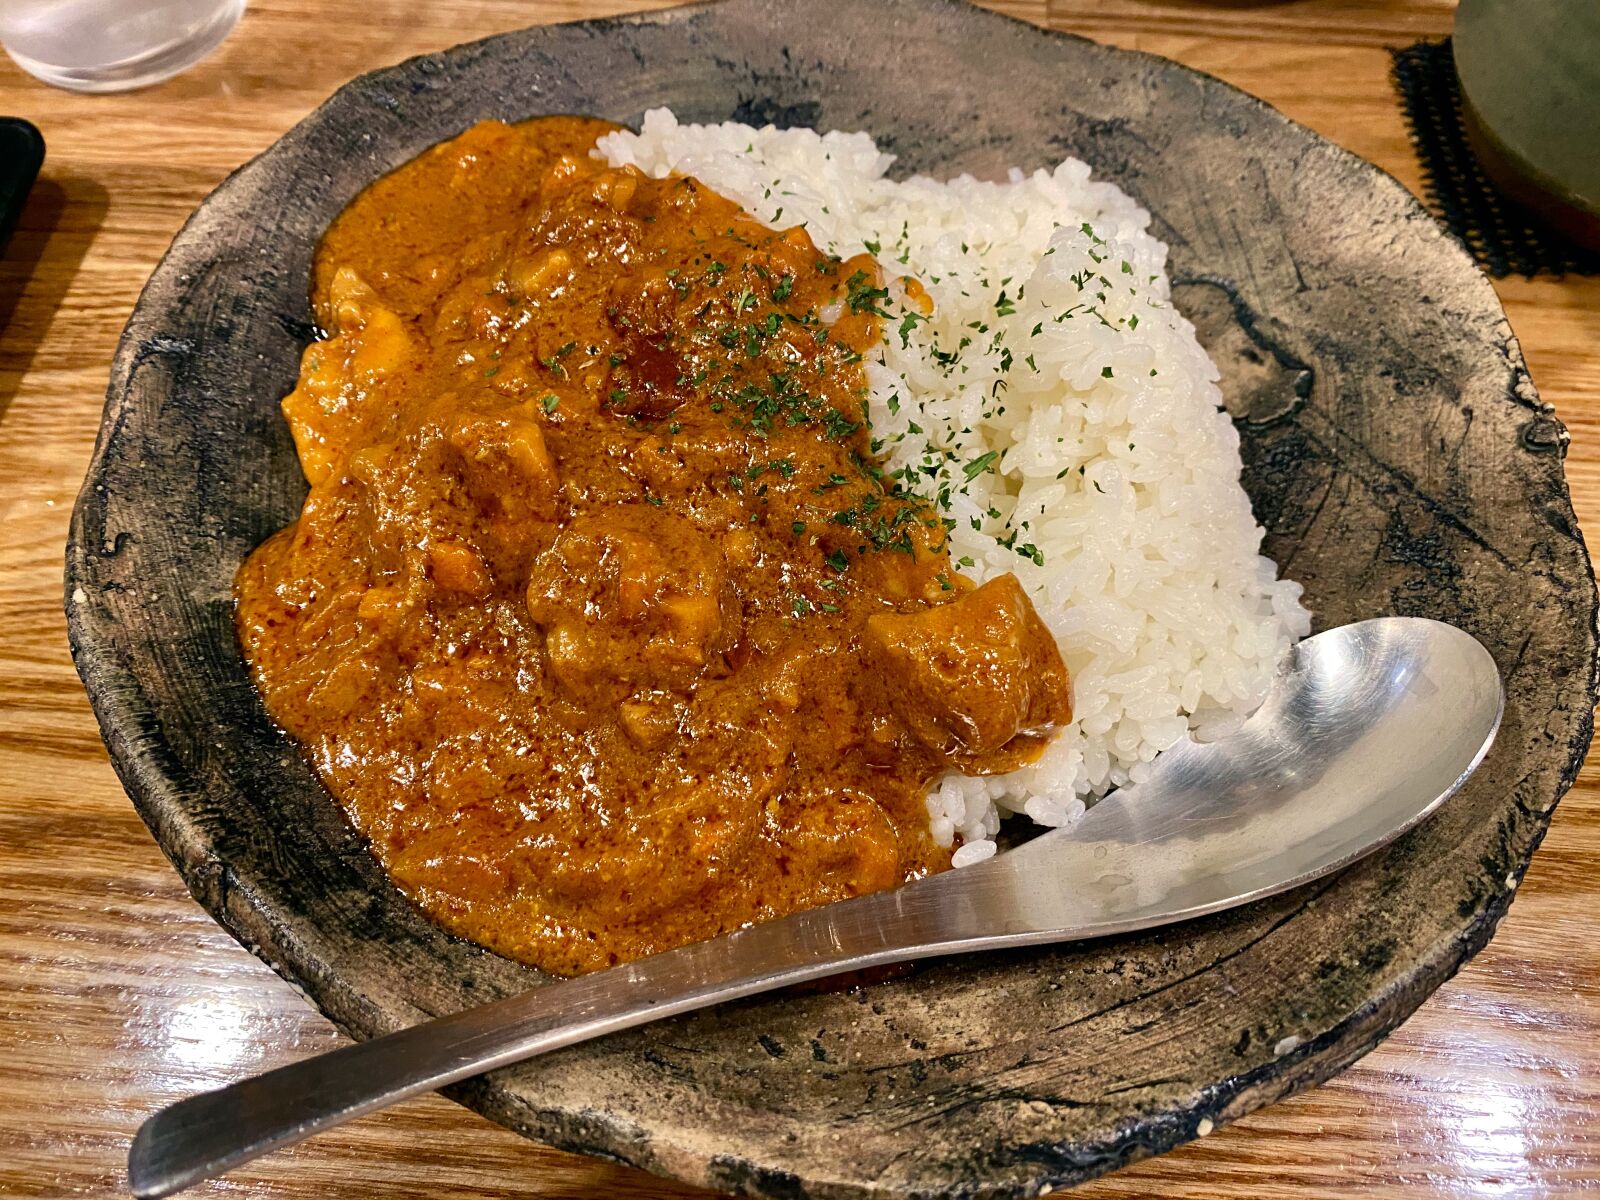 Apple iPhone 11 Pro Max sample photo. Curry, curry dishes, cuisine photography